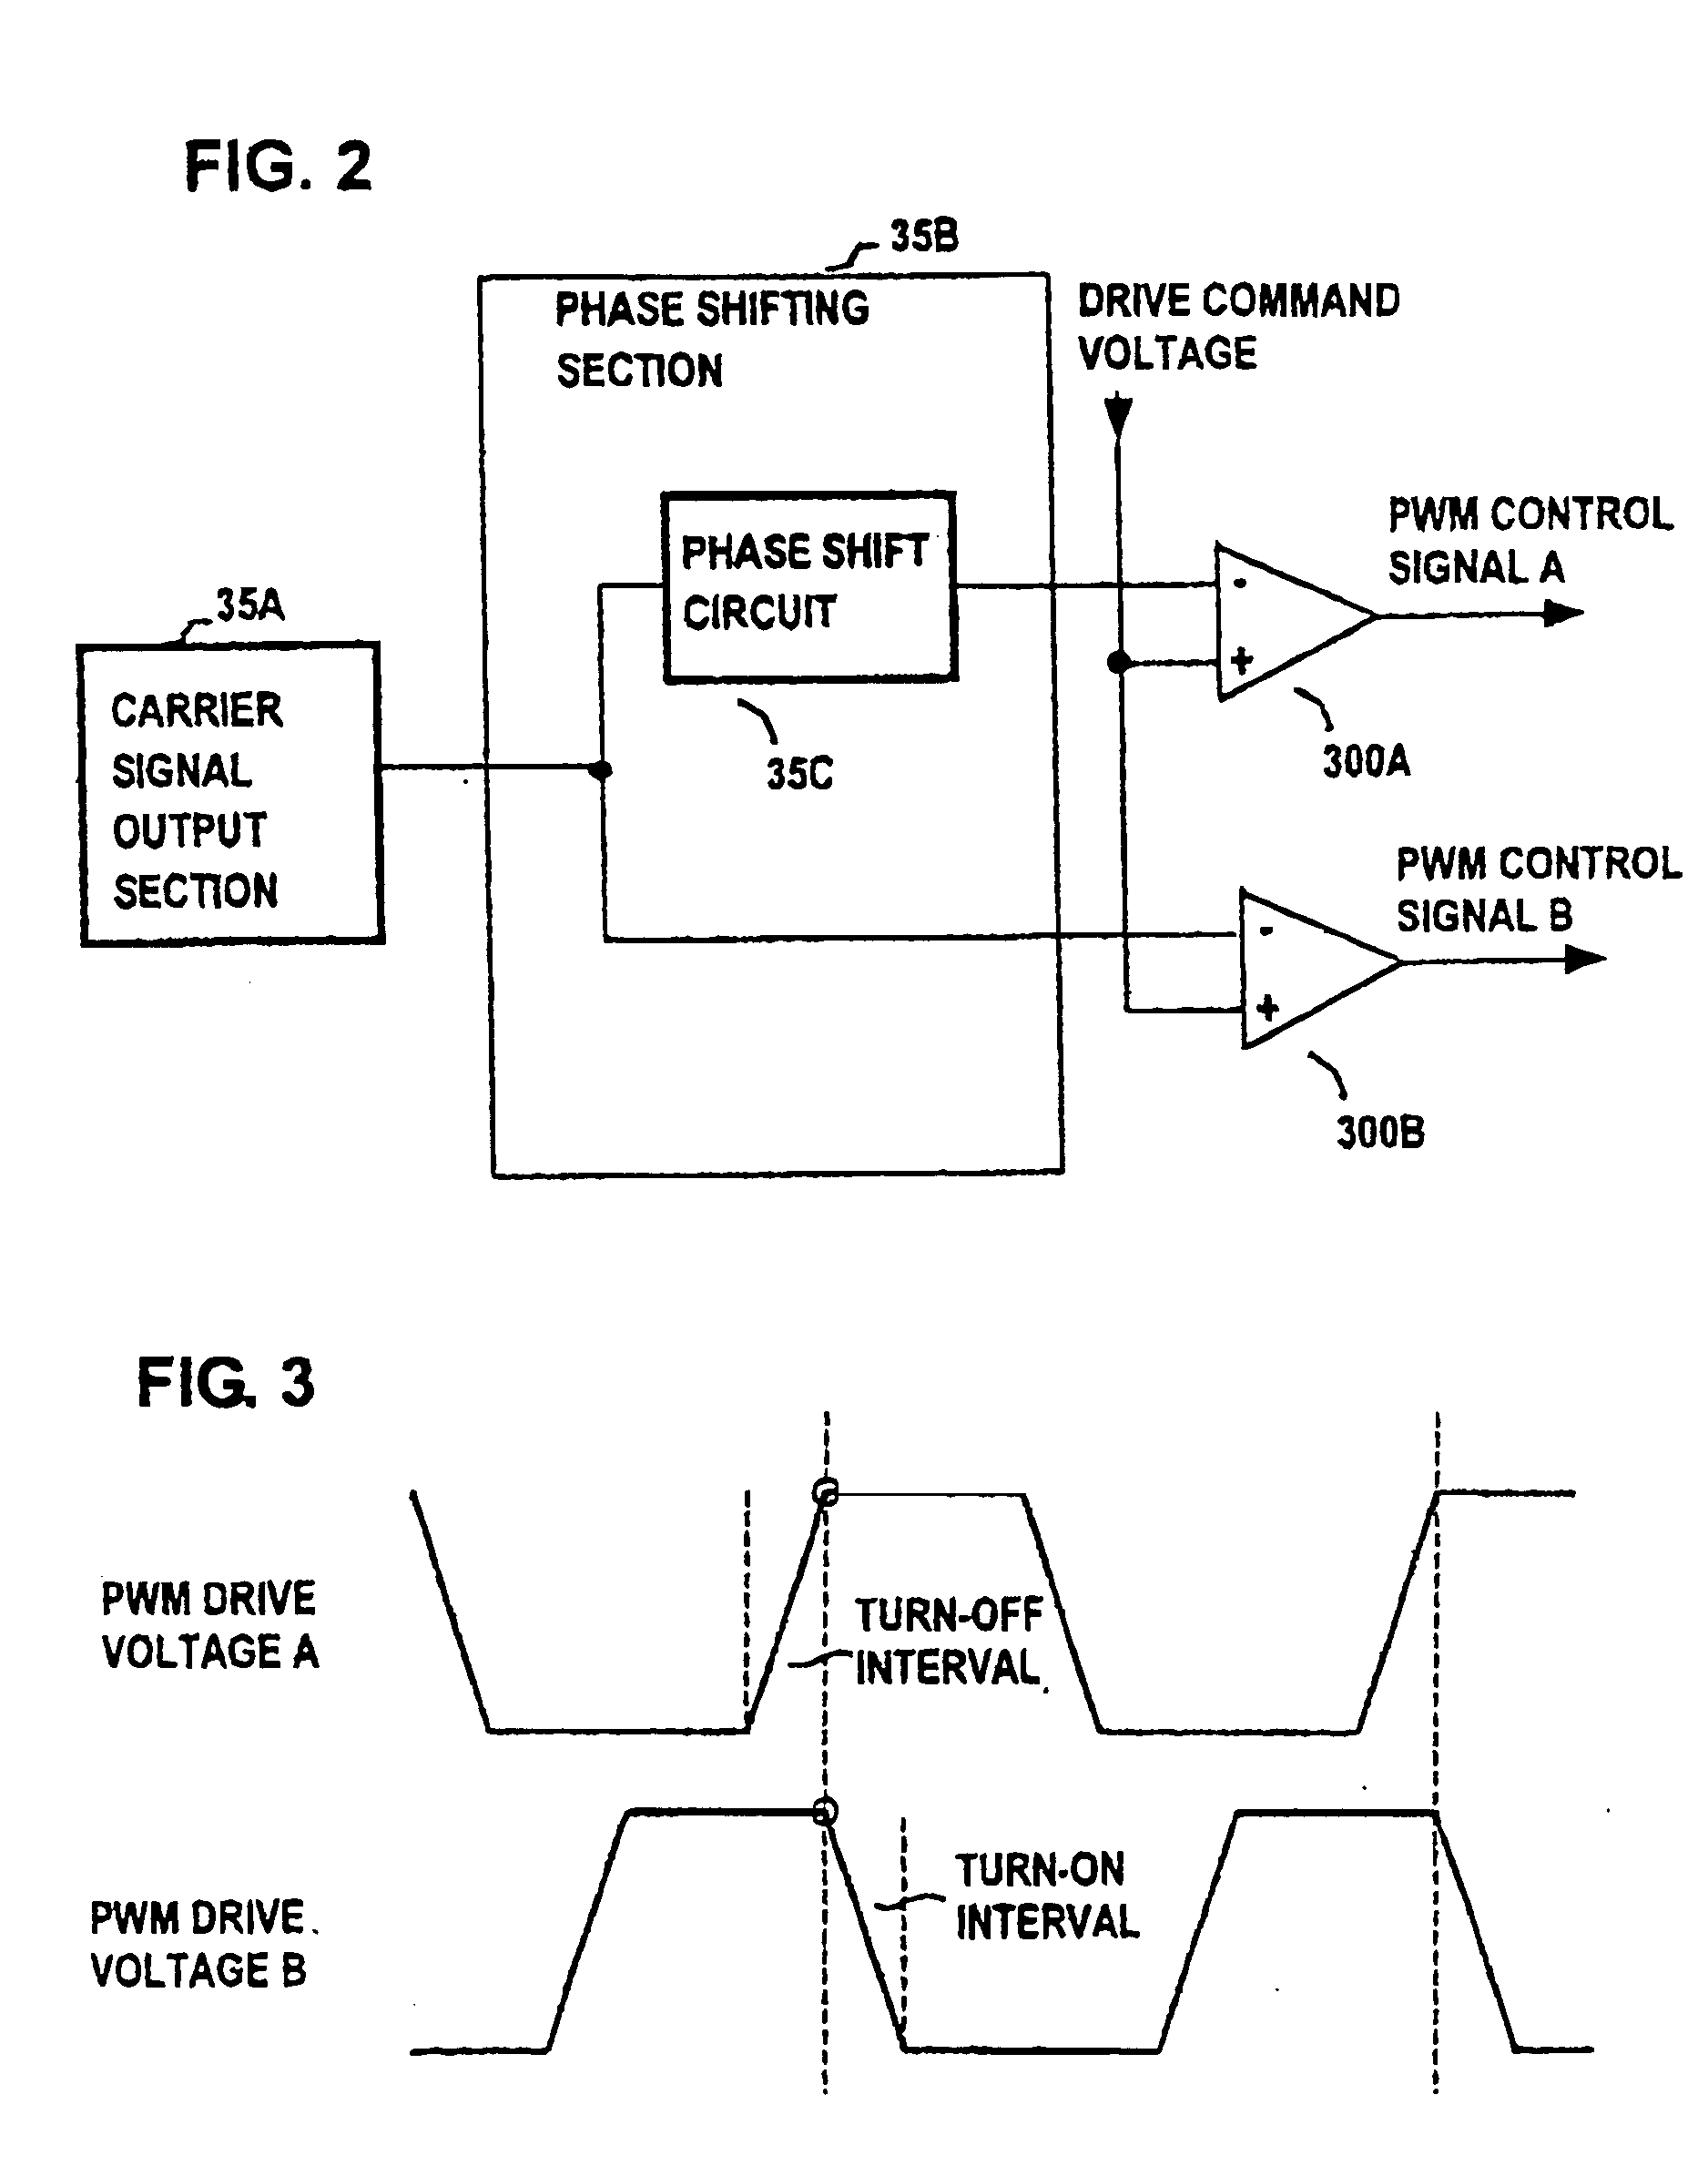 Drive apparatus for PWM control of two inductive loads with reduced generation of electrical noise